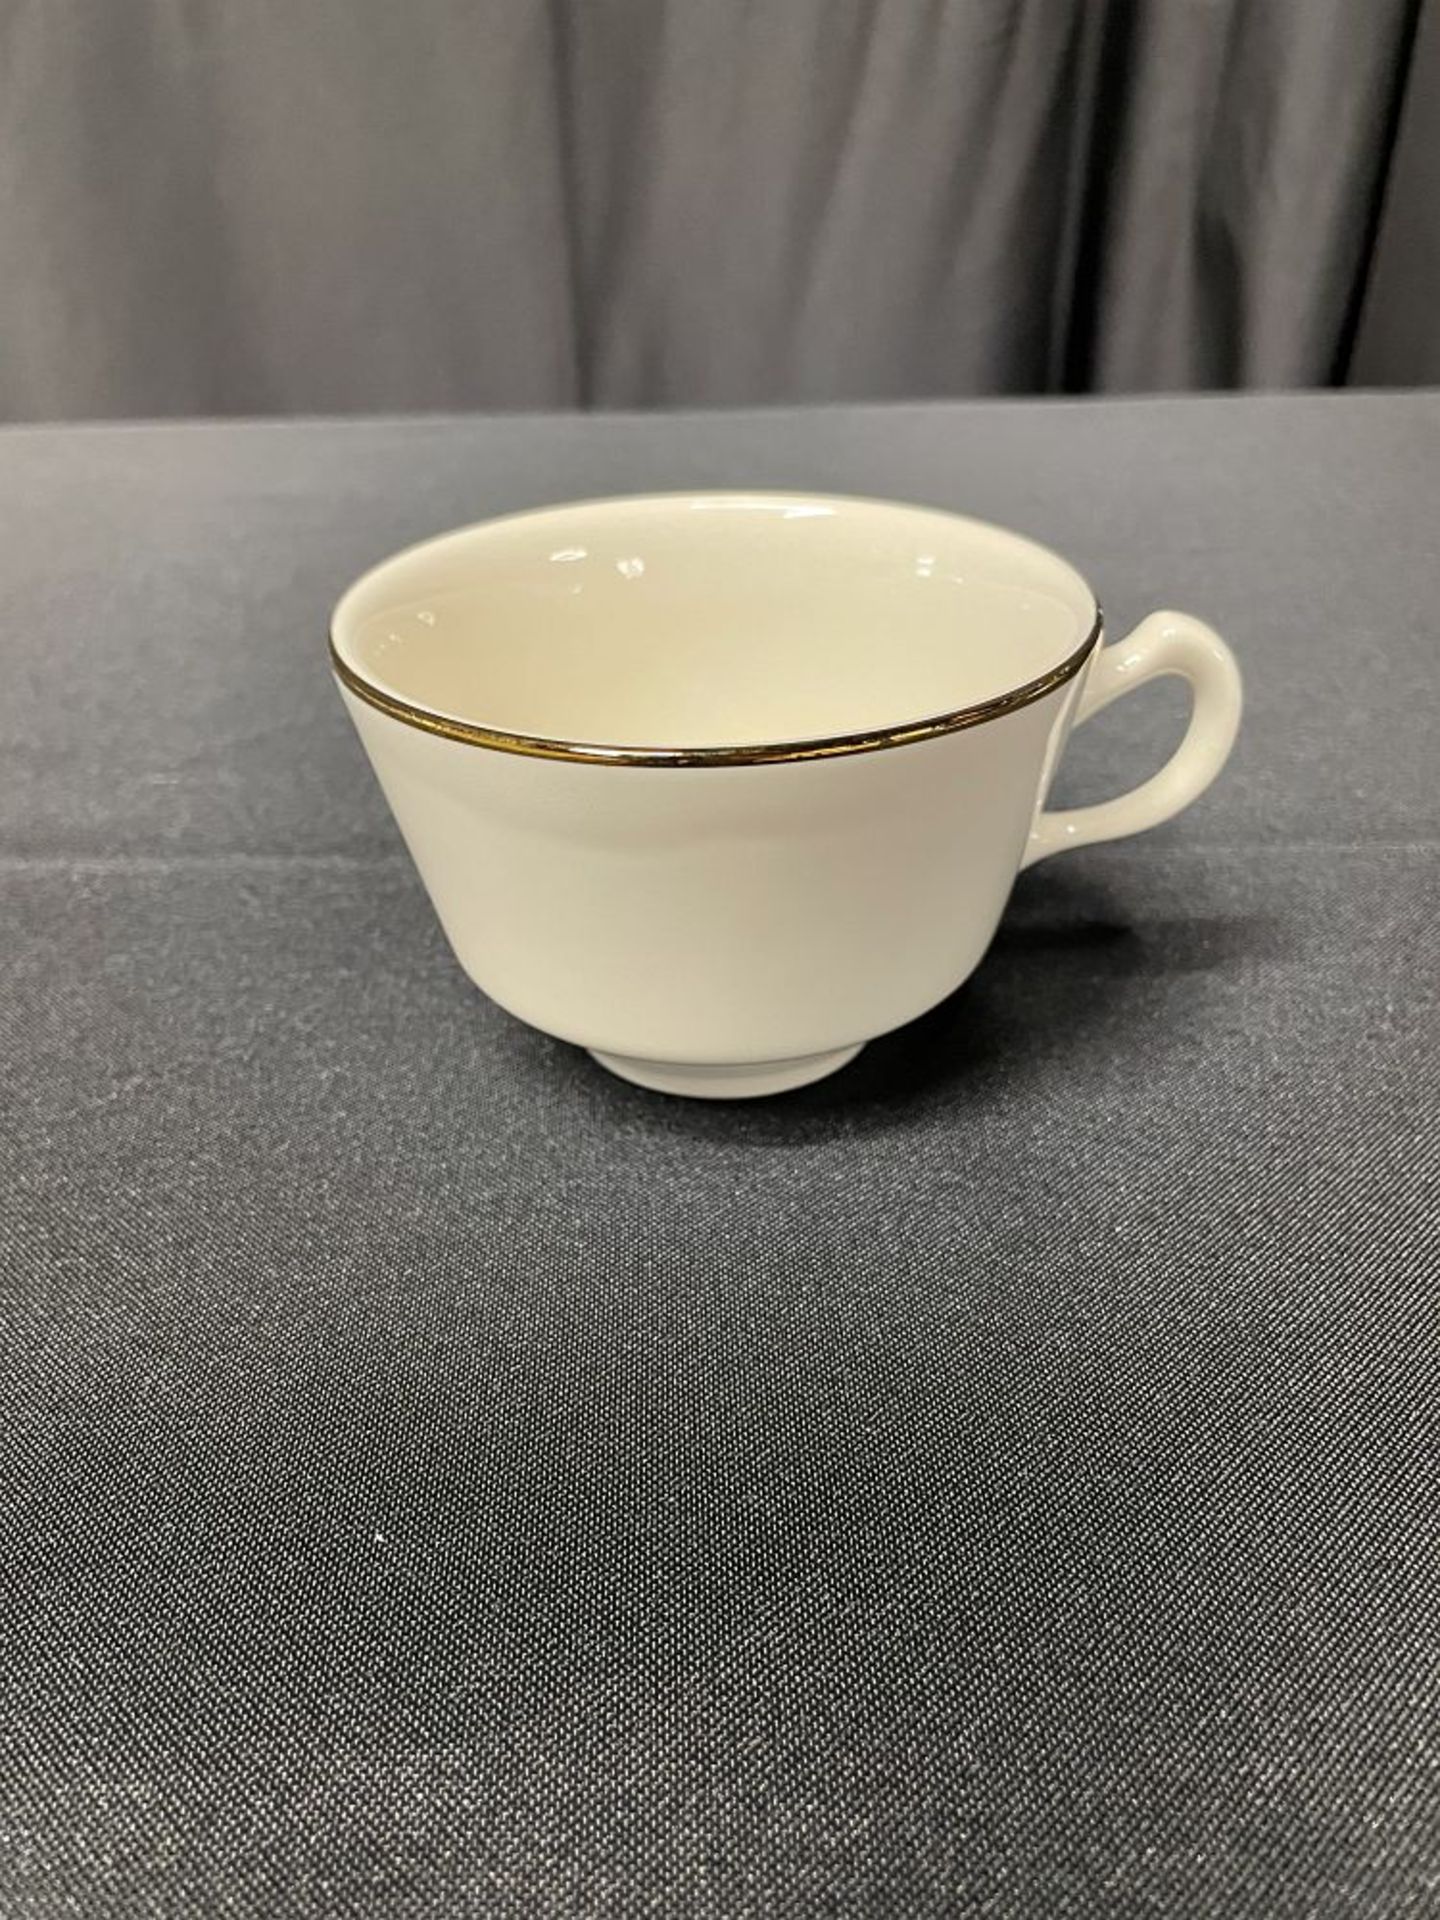 HOMER LAUGHLIN IVORY CUP 7 1/2 OZ.